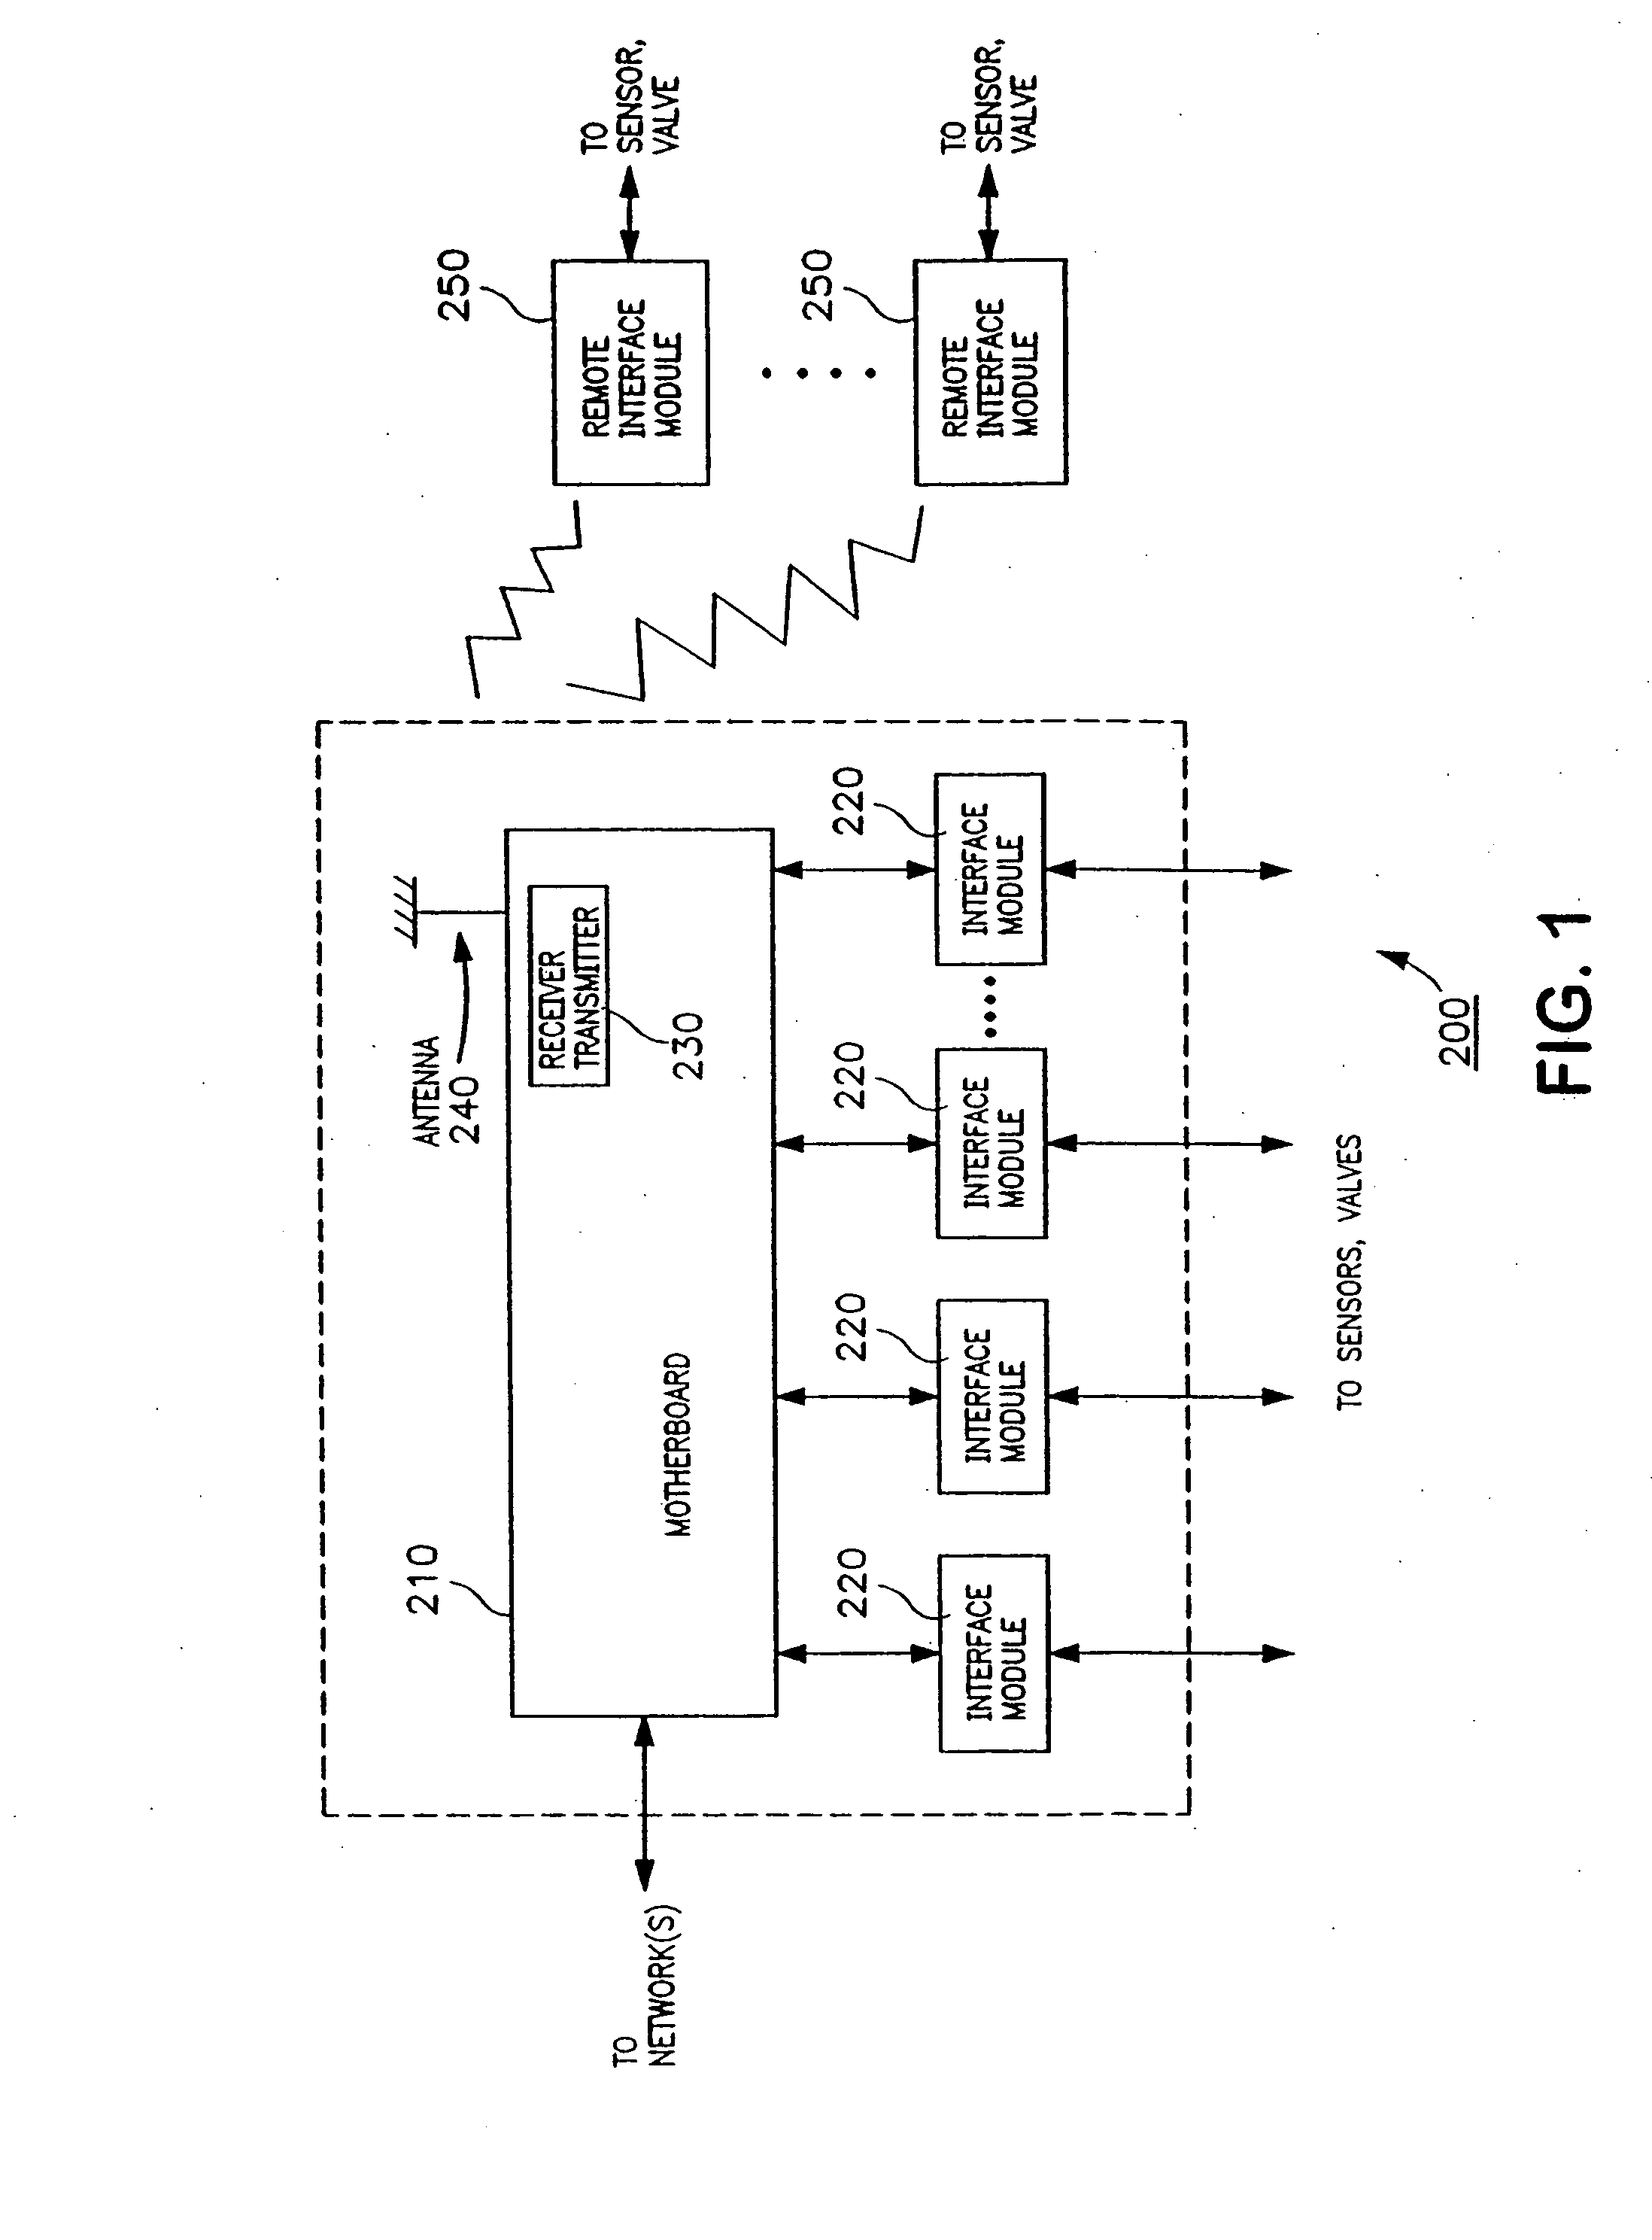 Systems and methods for monitoring and controlling fluid consumption